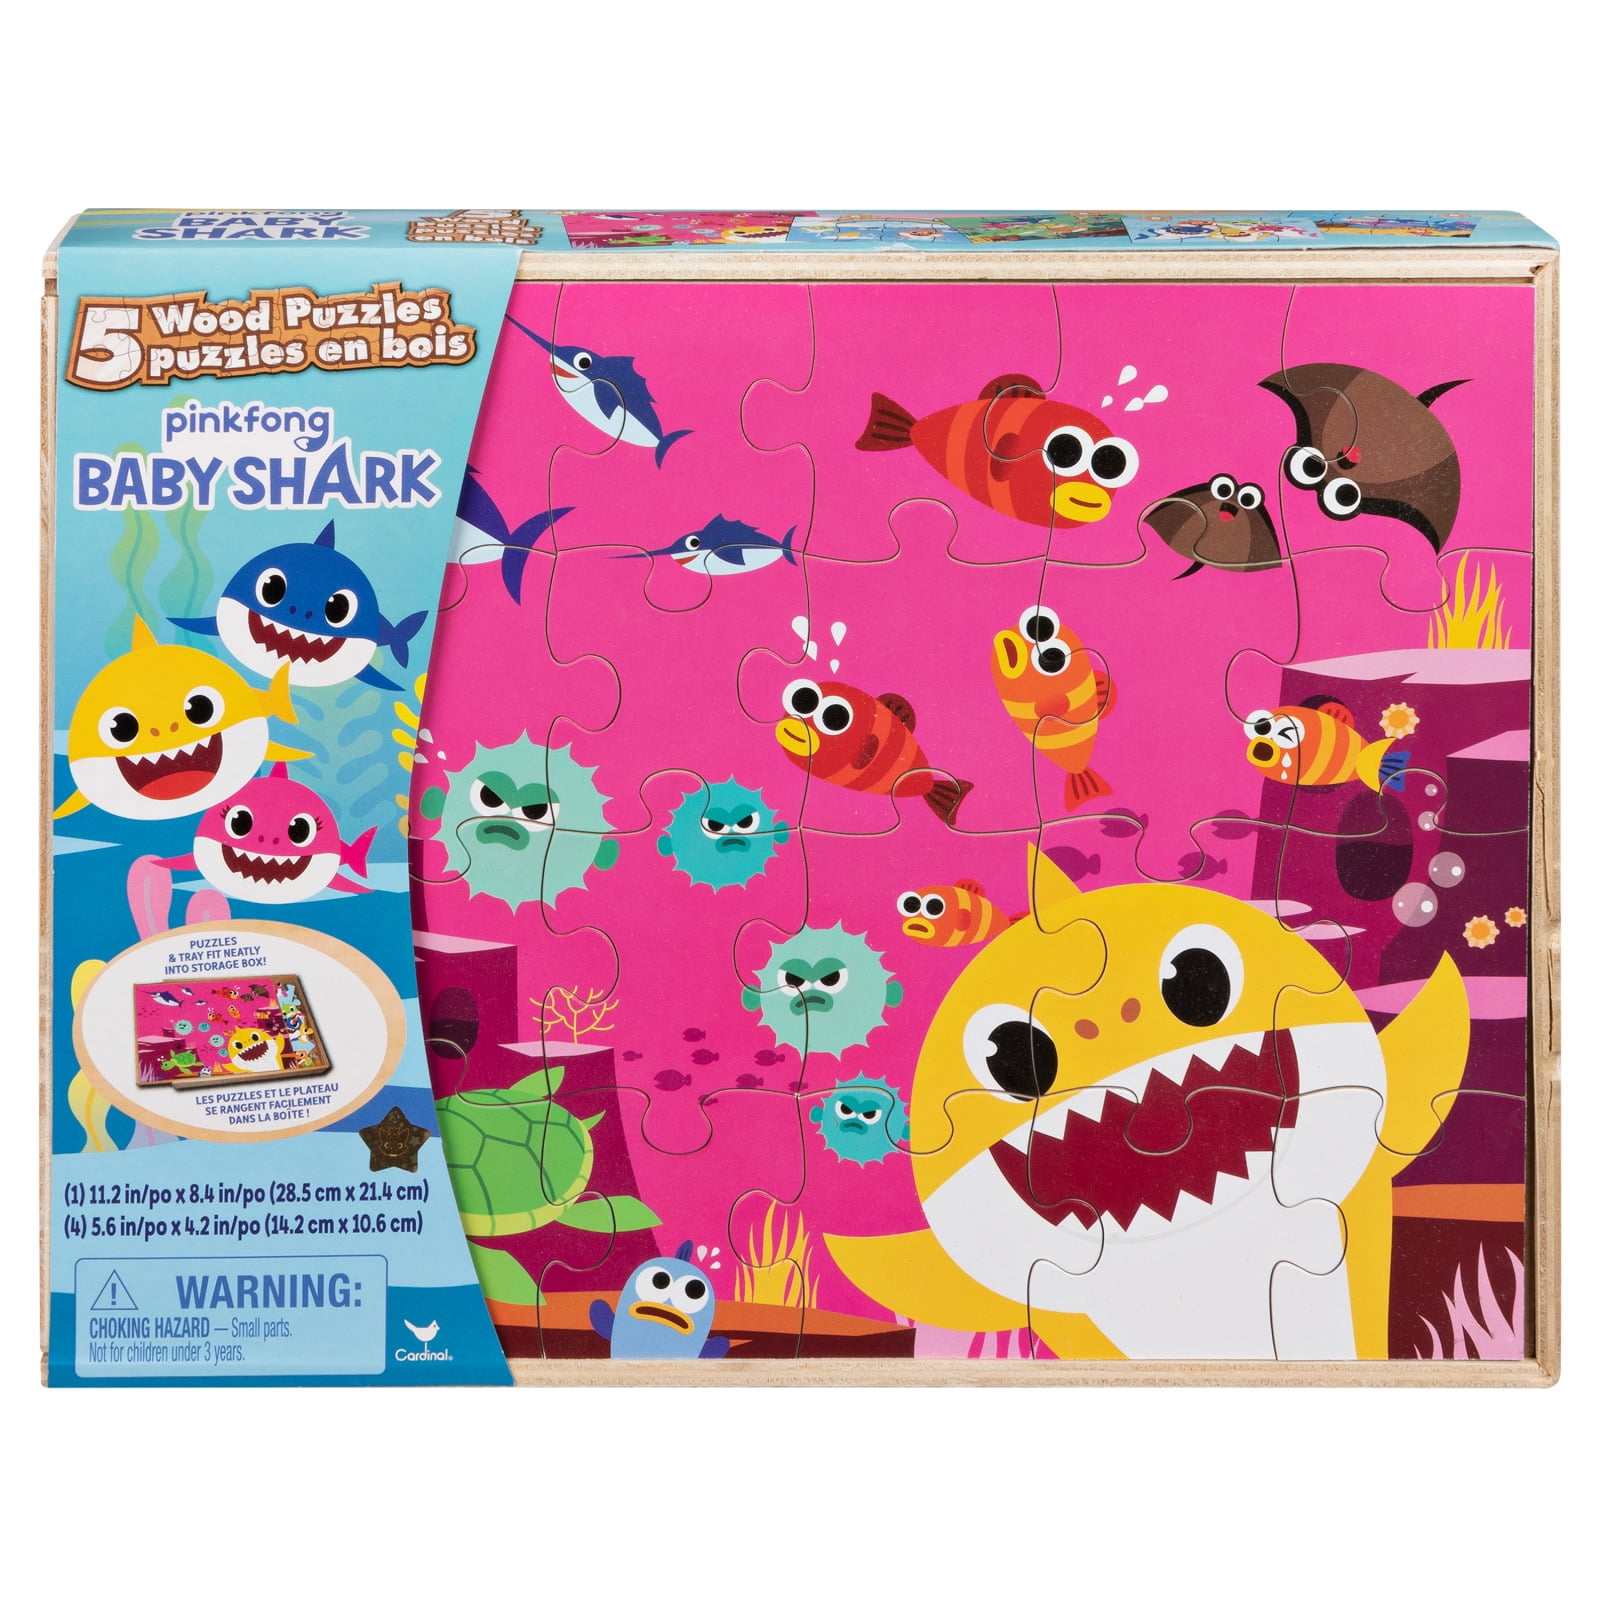 Pinkfong Jigsaw Puzzle Bag Set For Kids Child 